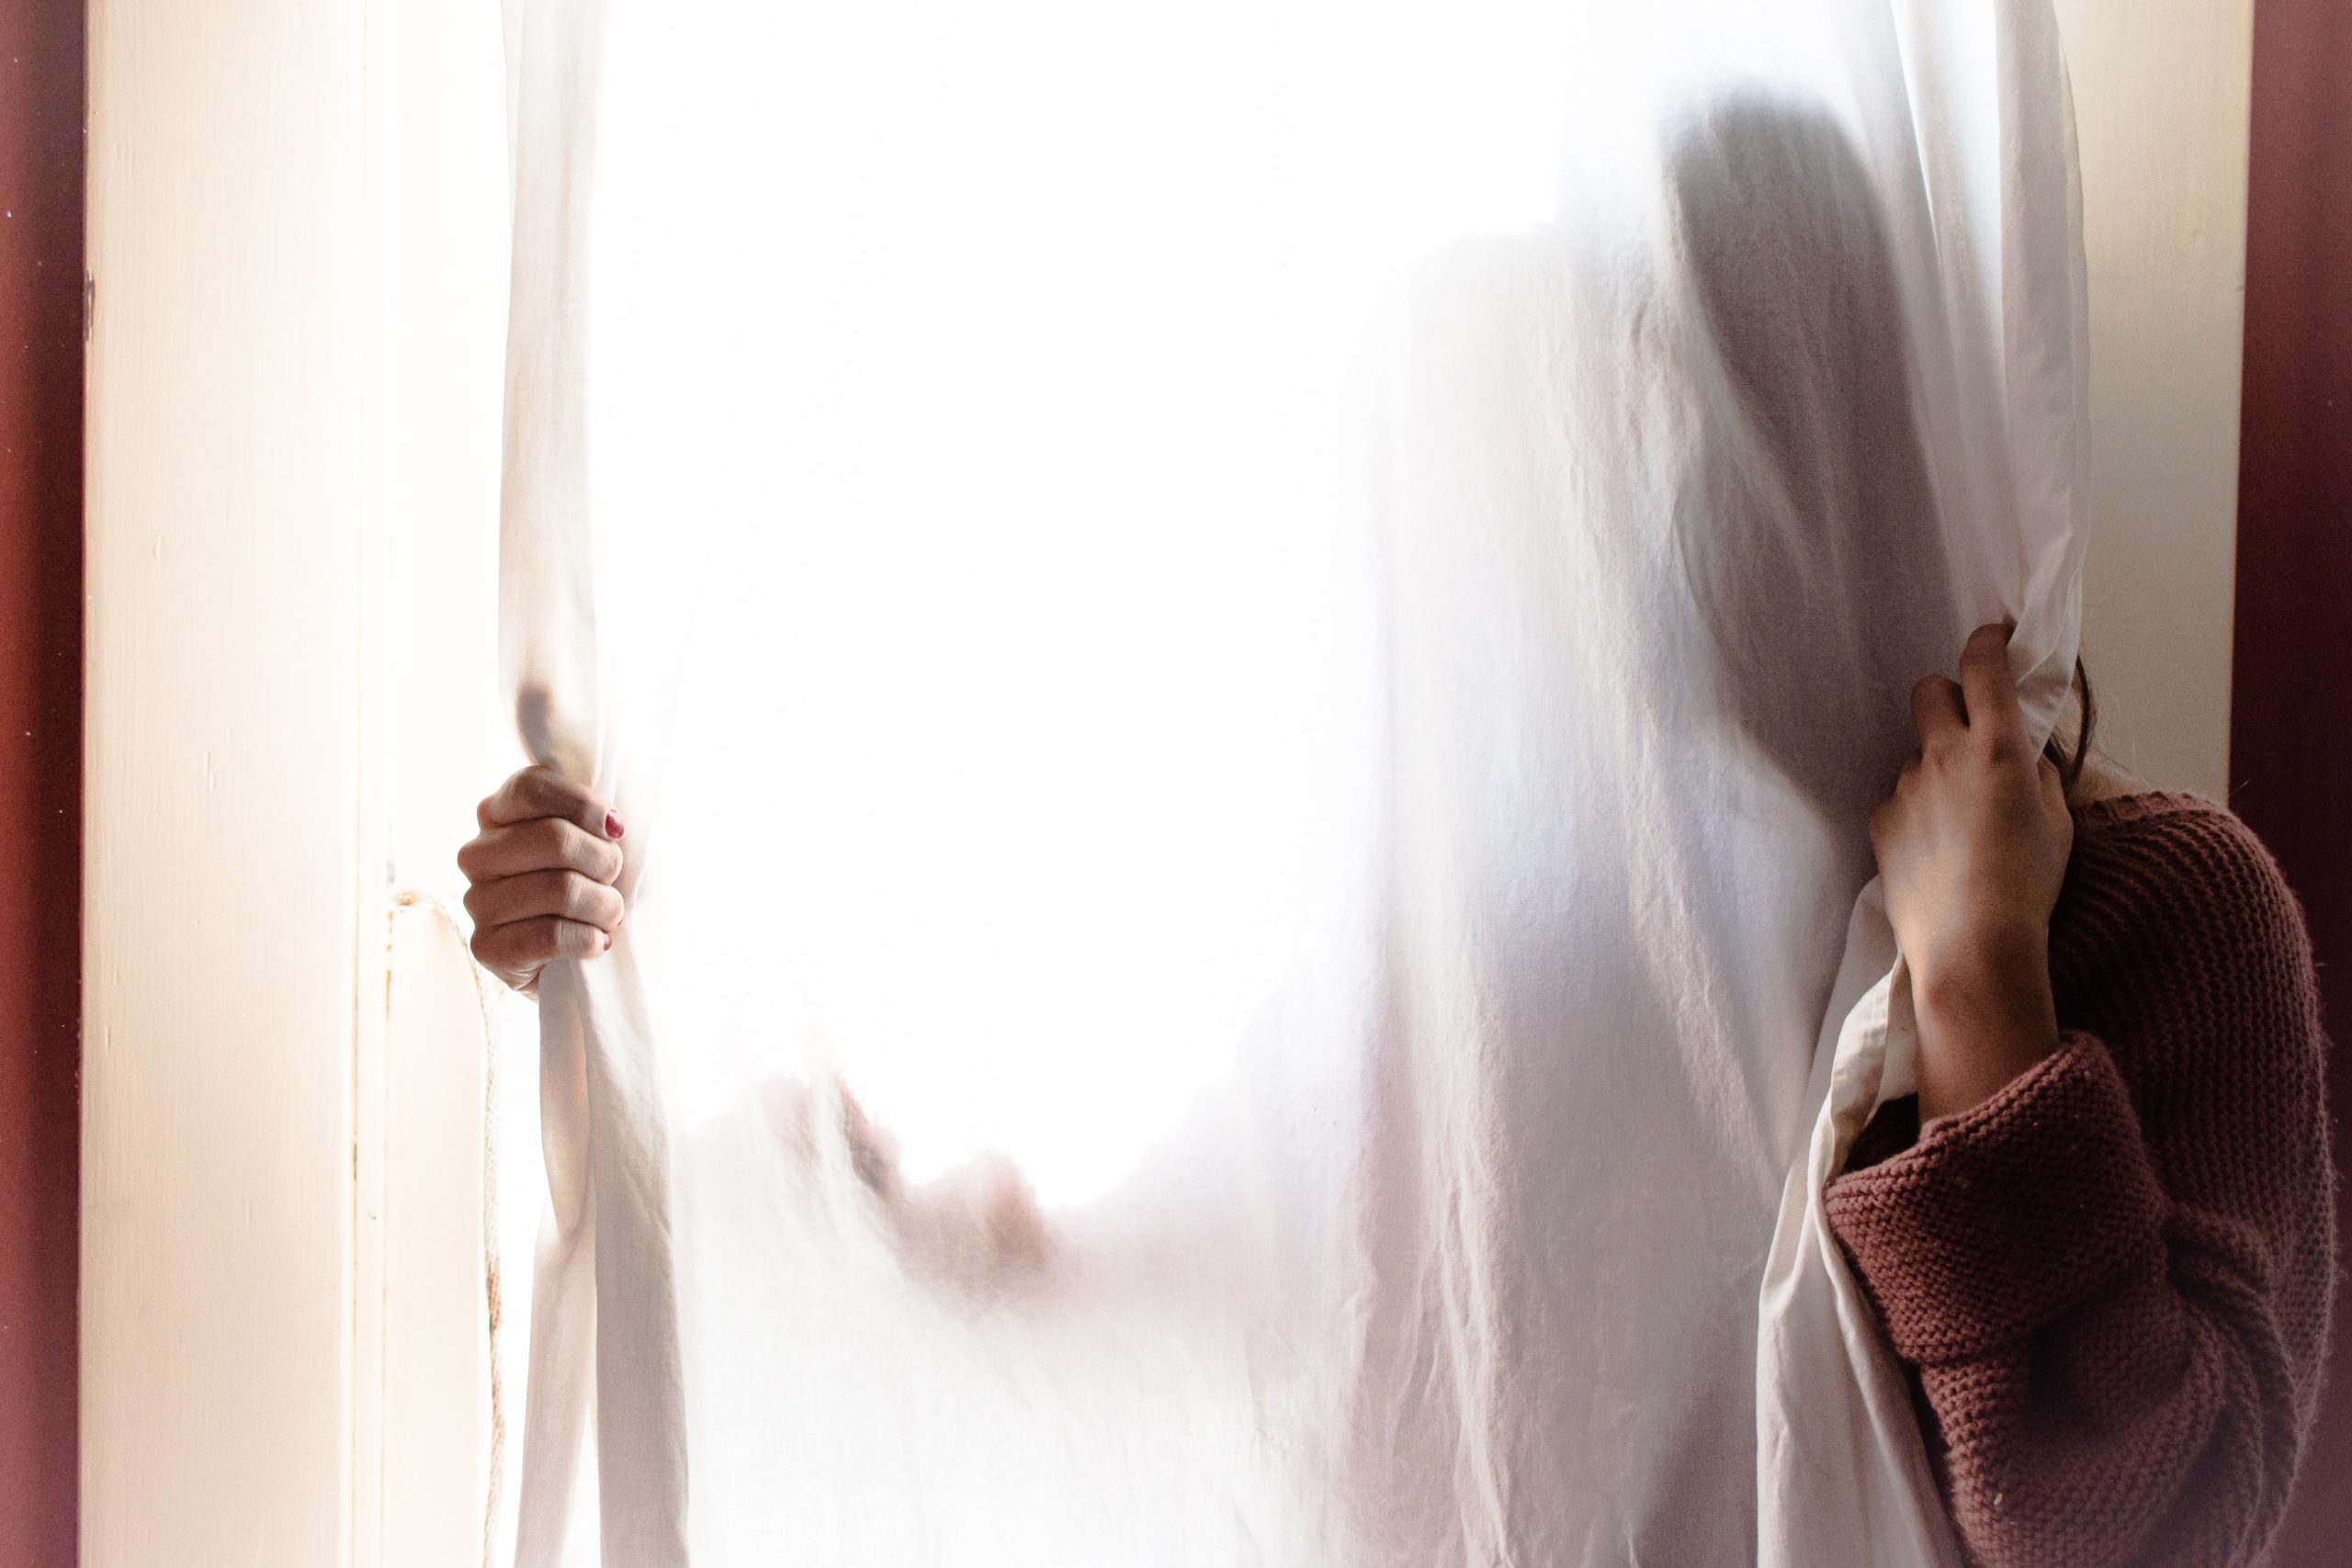 woman standing behind a sheer curtain hiding her face